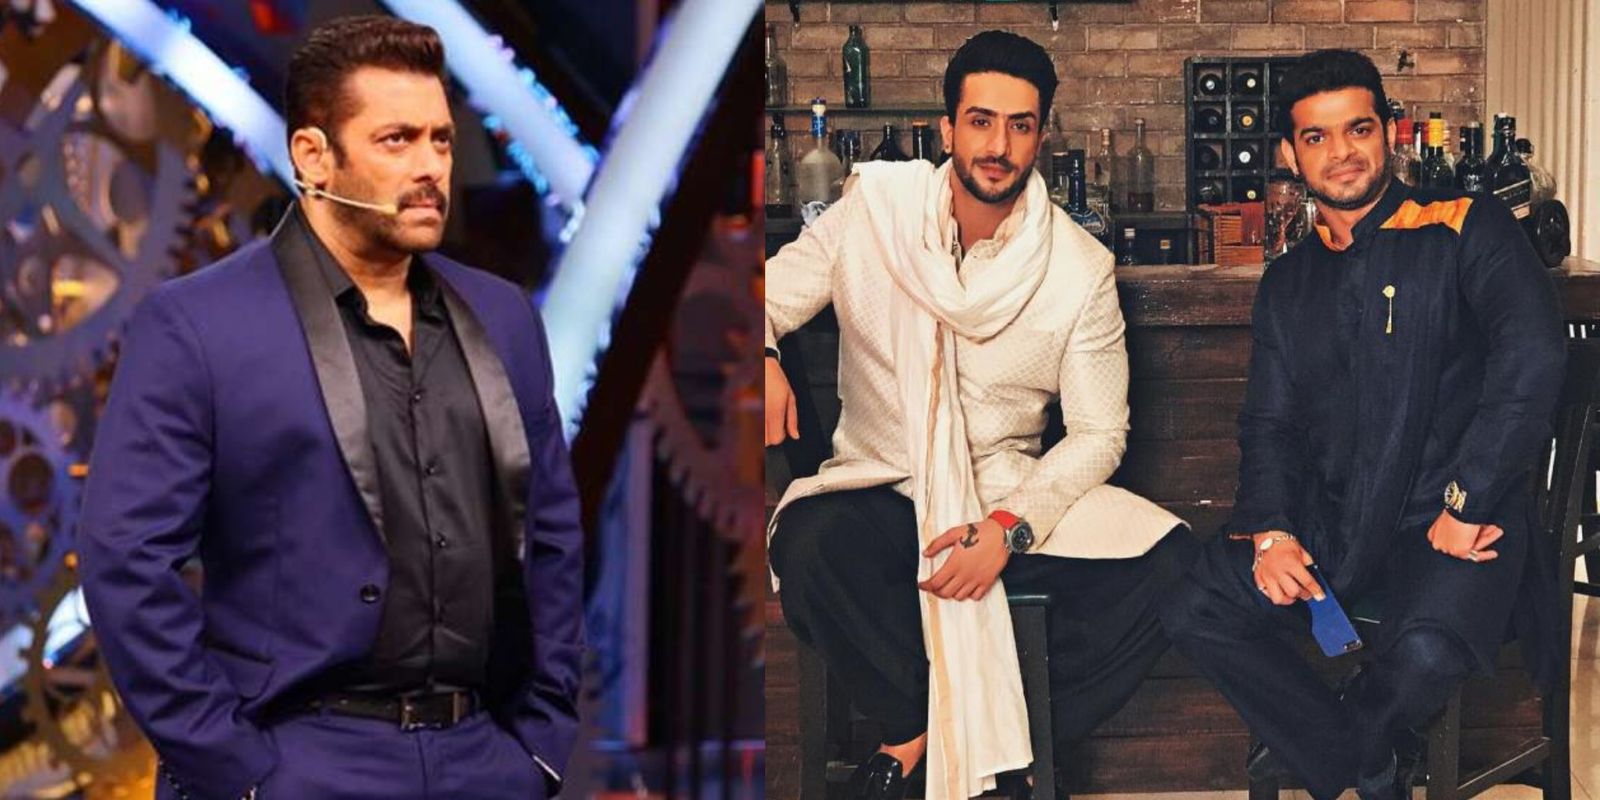 Bigg Boss 14: Have Karan Patel And Aly Goni Given A Nod To Makers Of Salman Khan’s Reality Show?